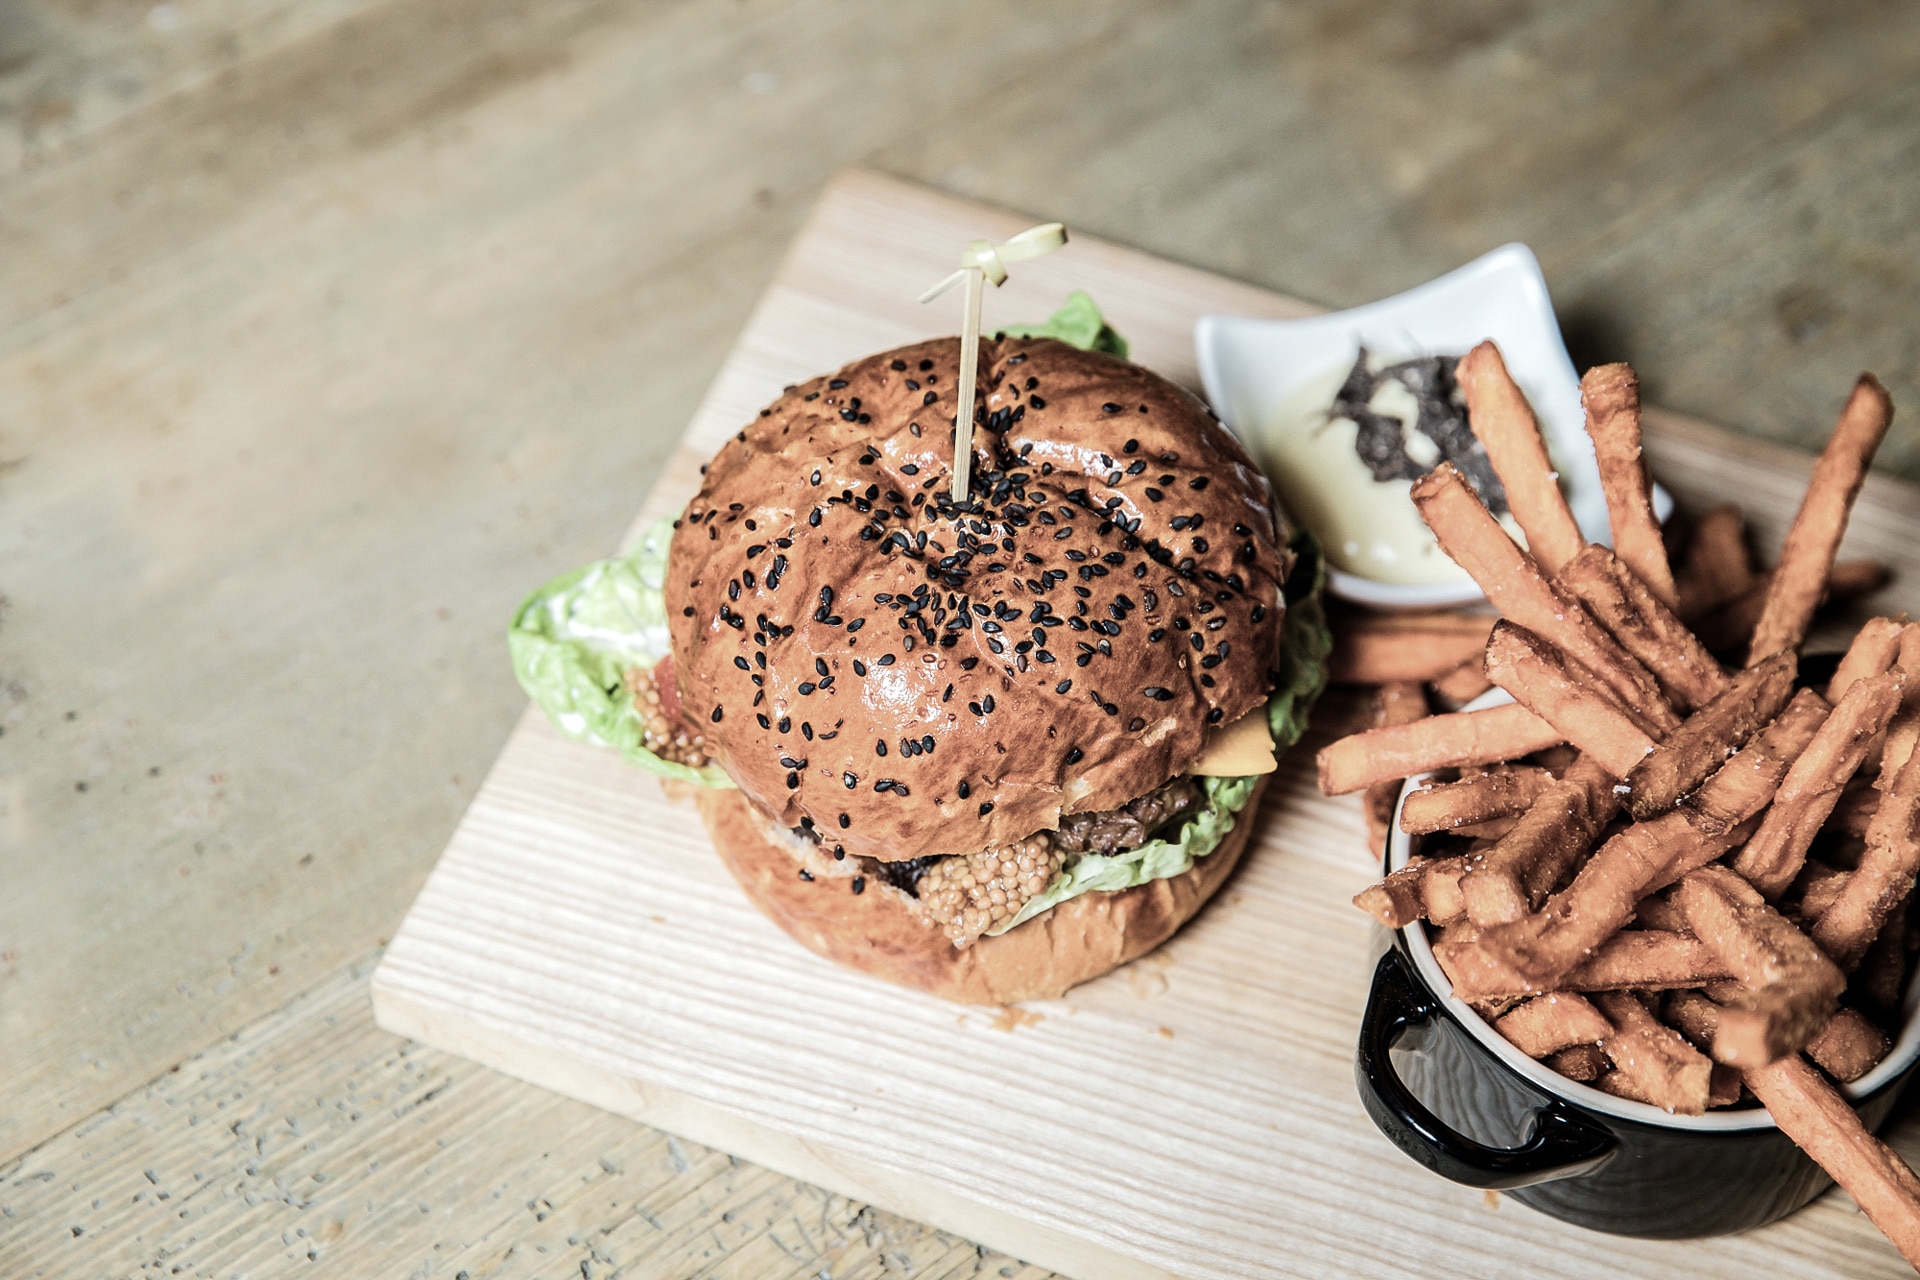 A delicious gourmet burger with sesame seed bun and fresh lettuce, accompanied by a side of crispy sweet potato fries, served on a rustic wooden cutting board.